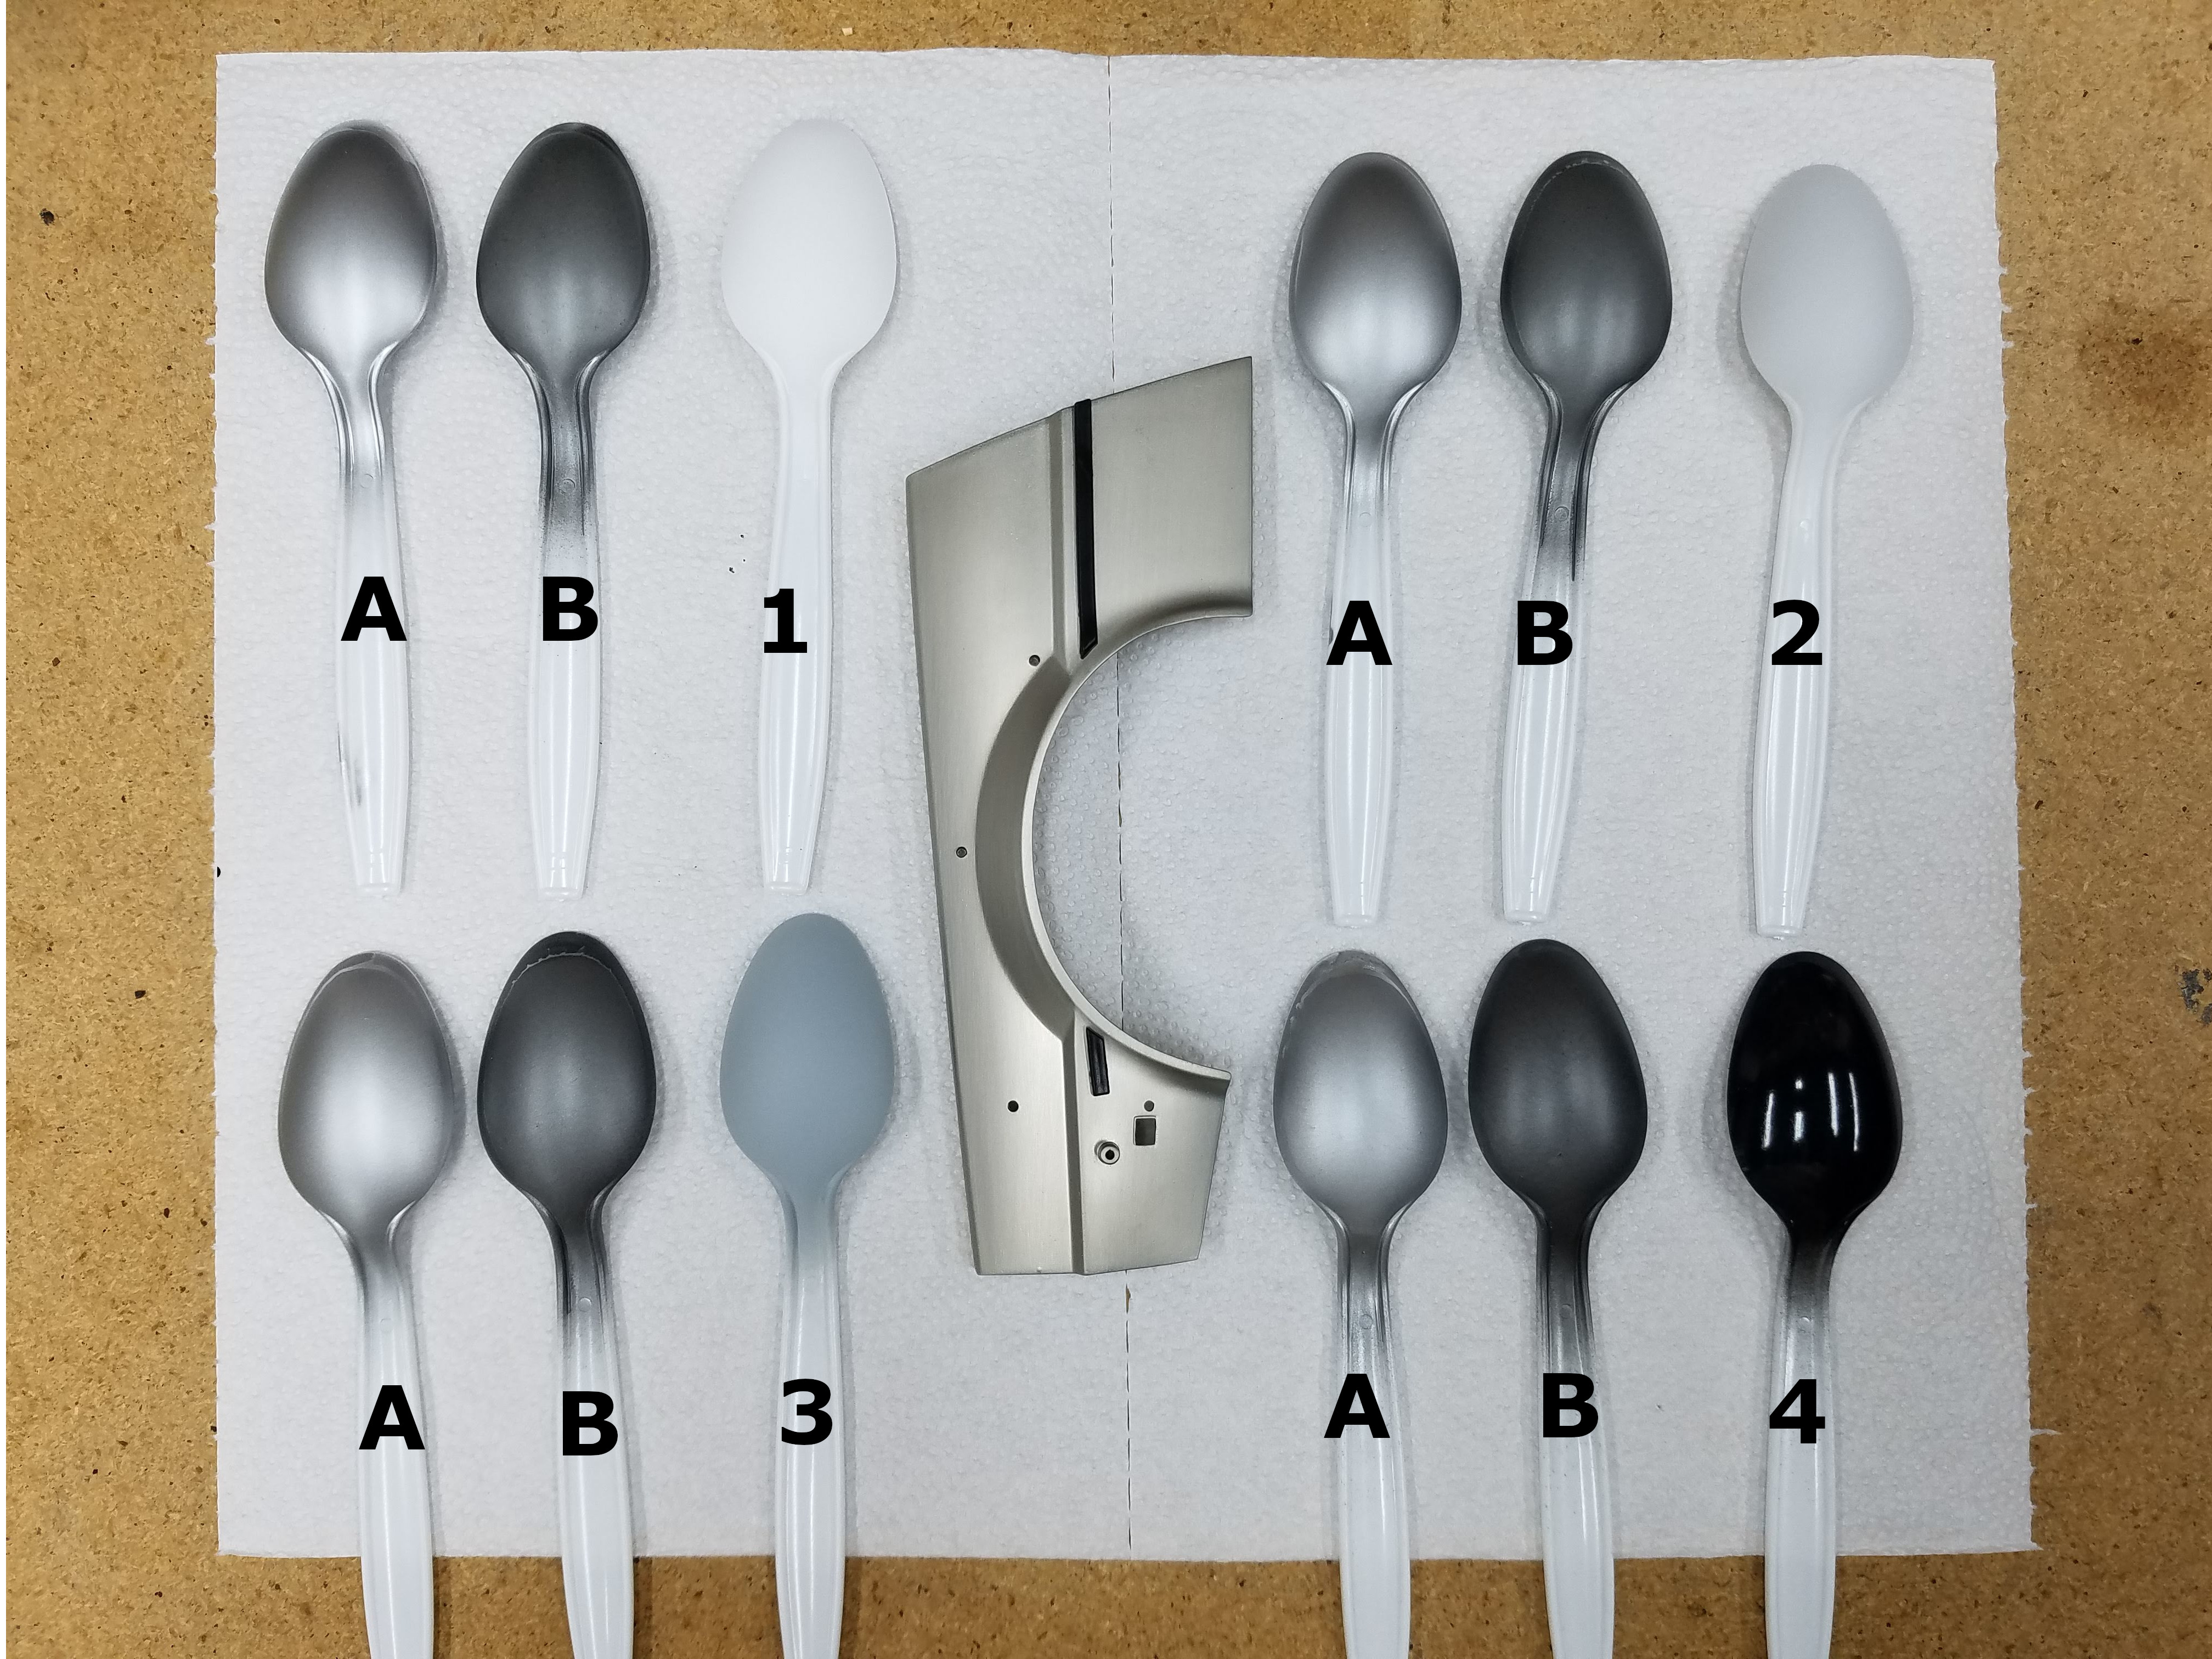 Test spoons searching for the right stainless steel